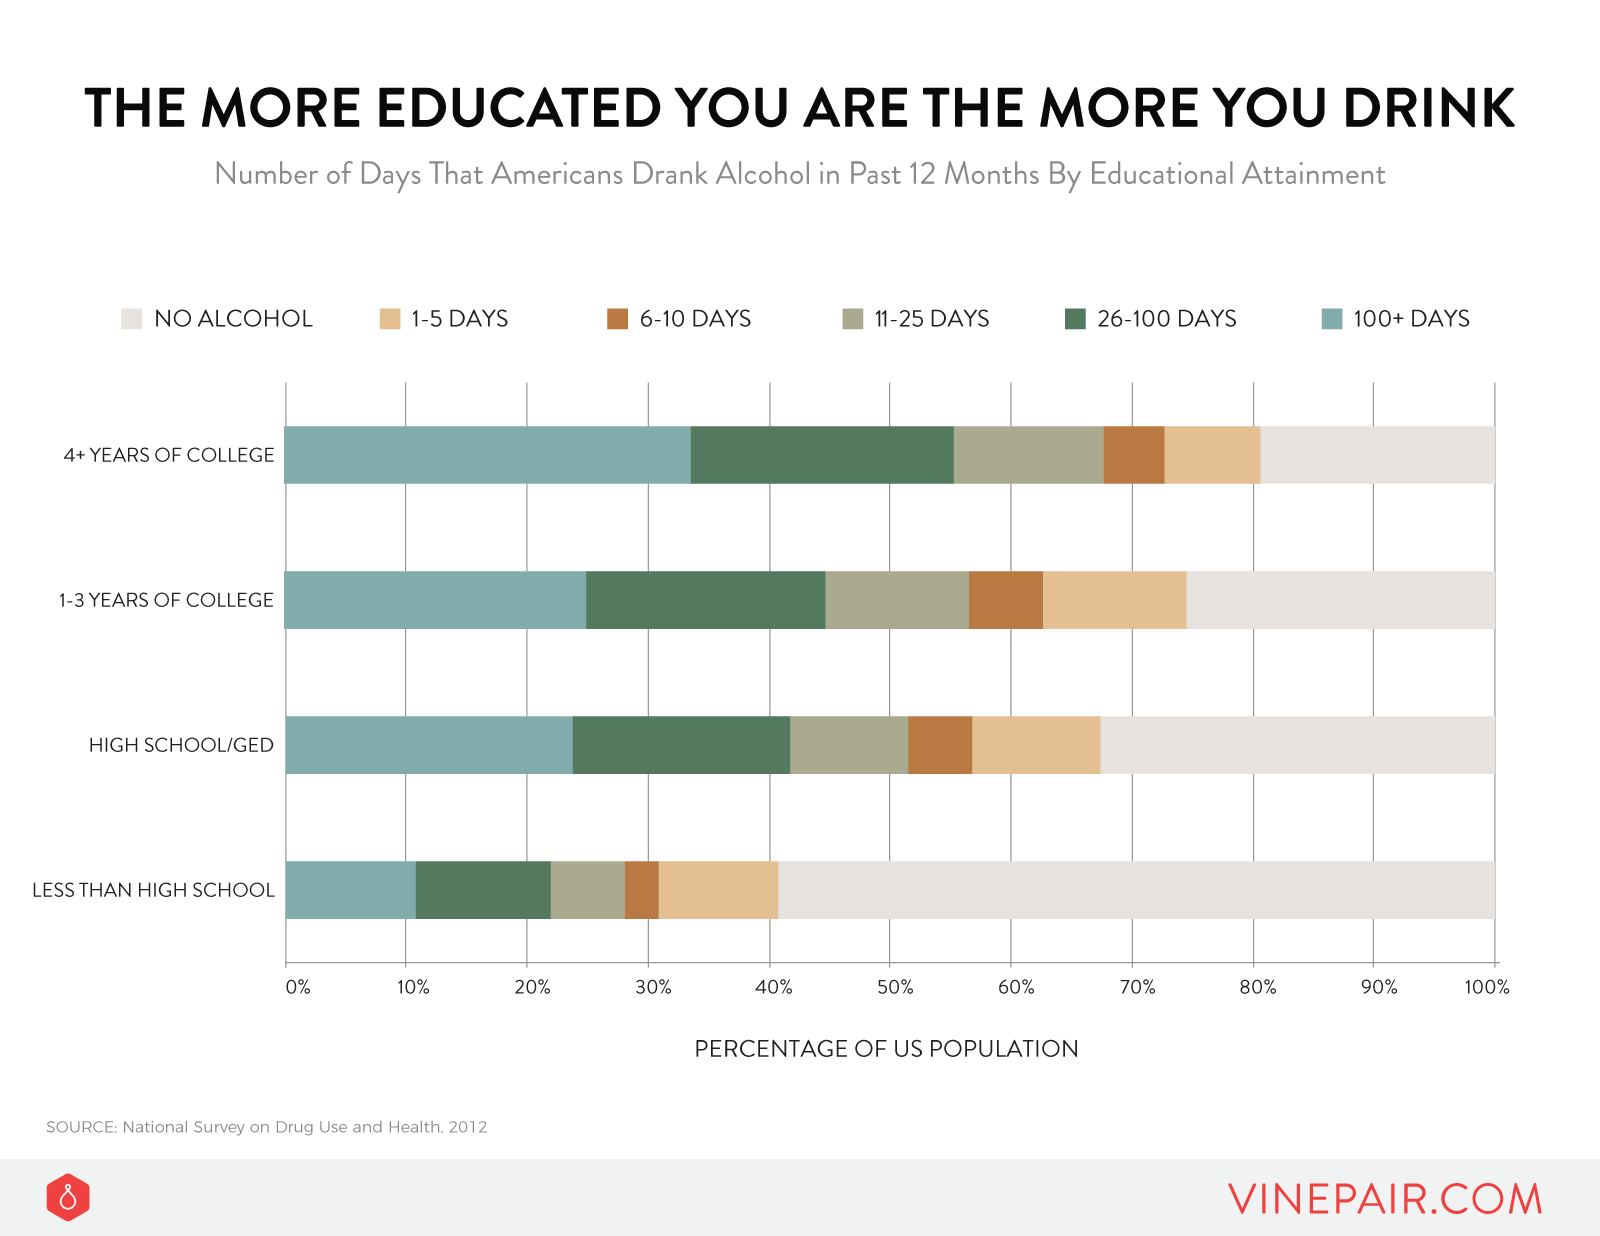 The more educated you are, the more you drink